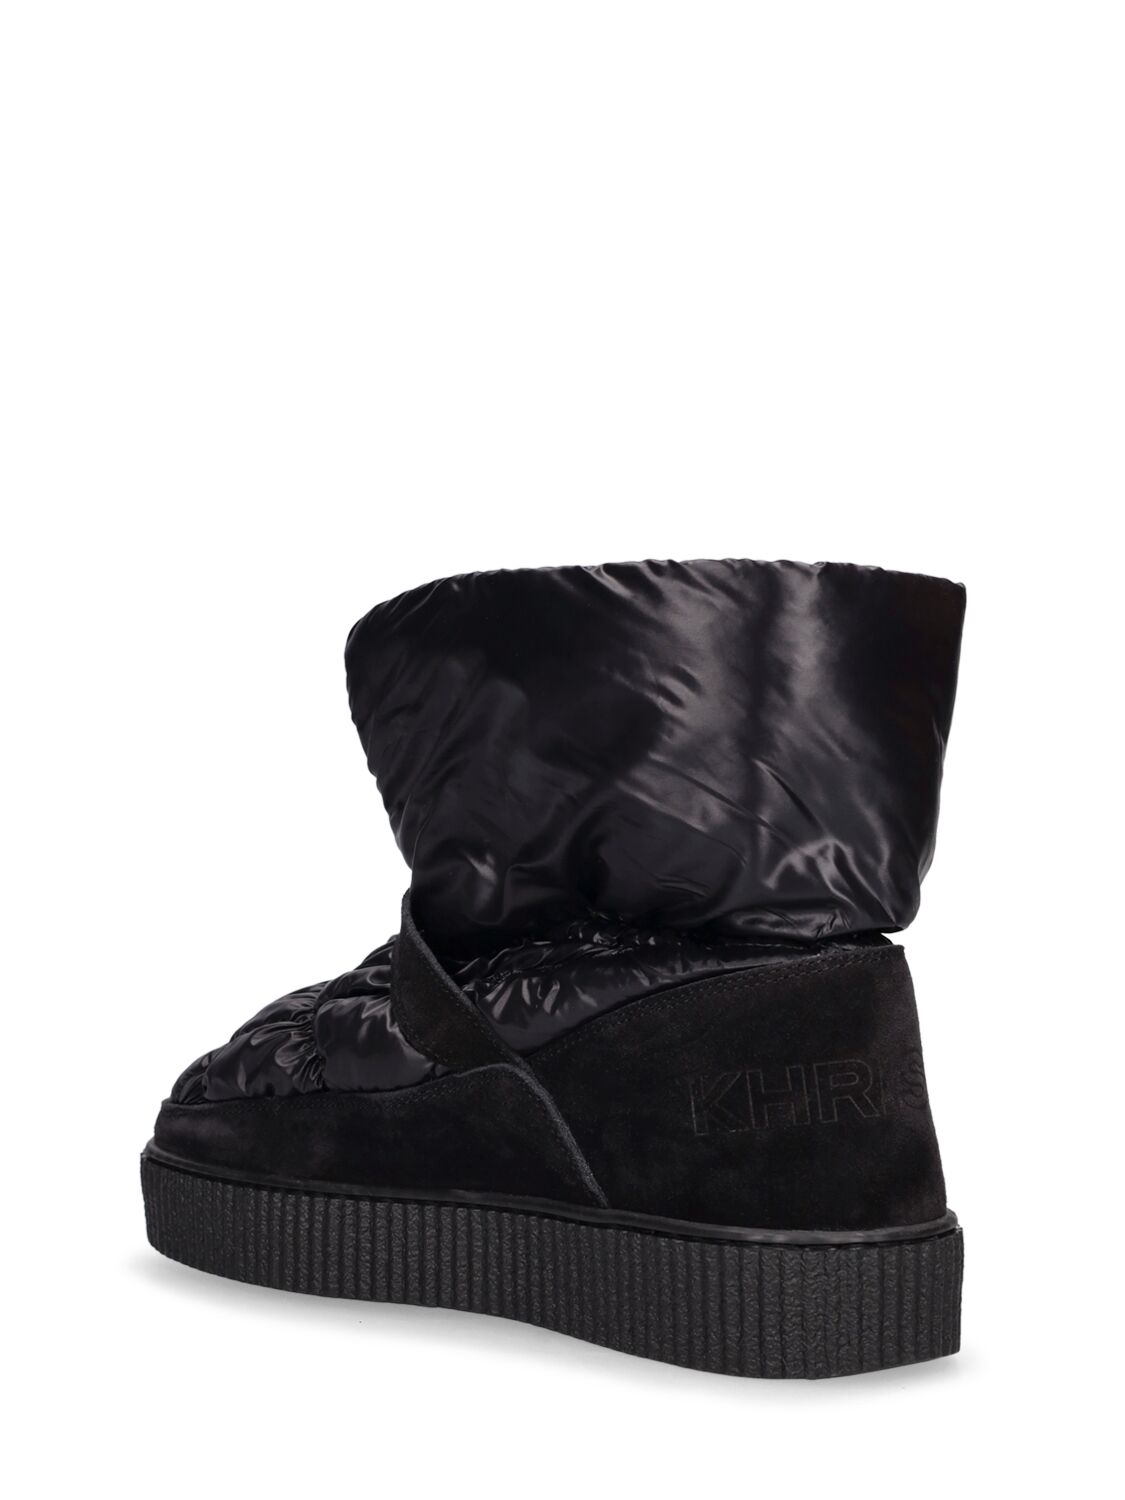 Shop Khrisjoy Nylon & Leather Snow Boots In Black